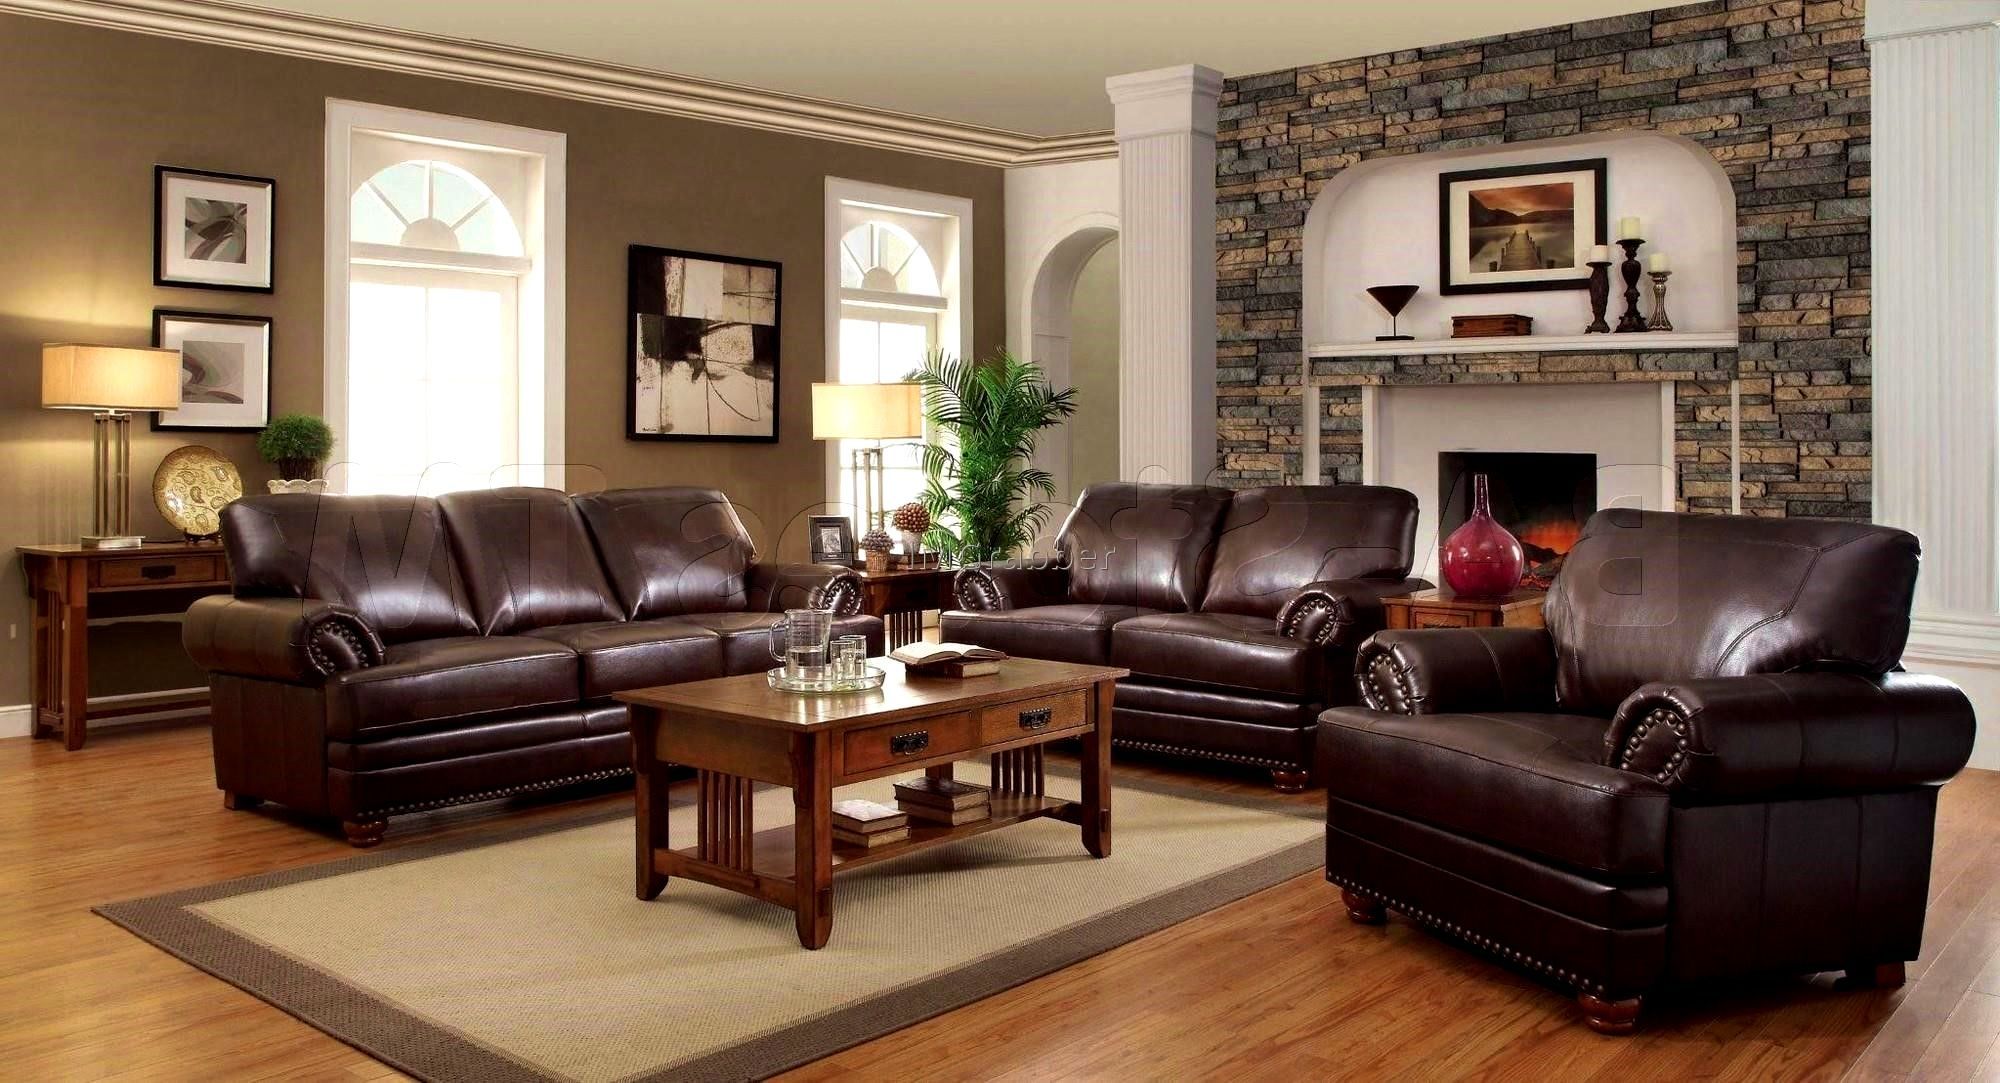 Decorating Ideas For Brown Living Room Furniture: How To Make It Look With Sofas With Ottomans In Brown (Gallery 20 of 20)